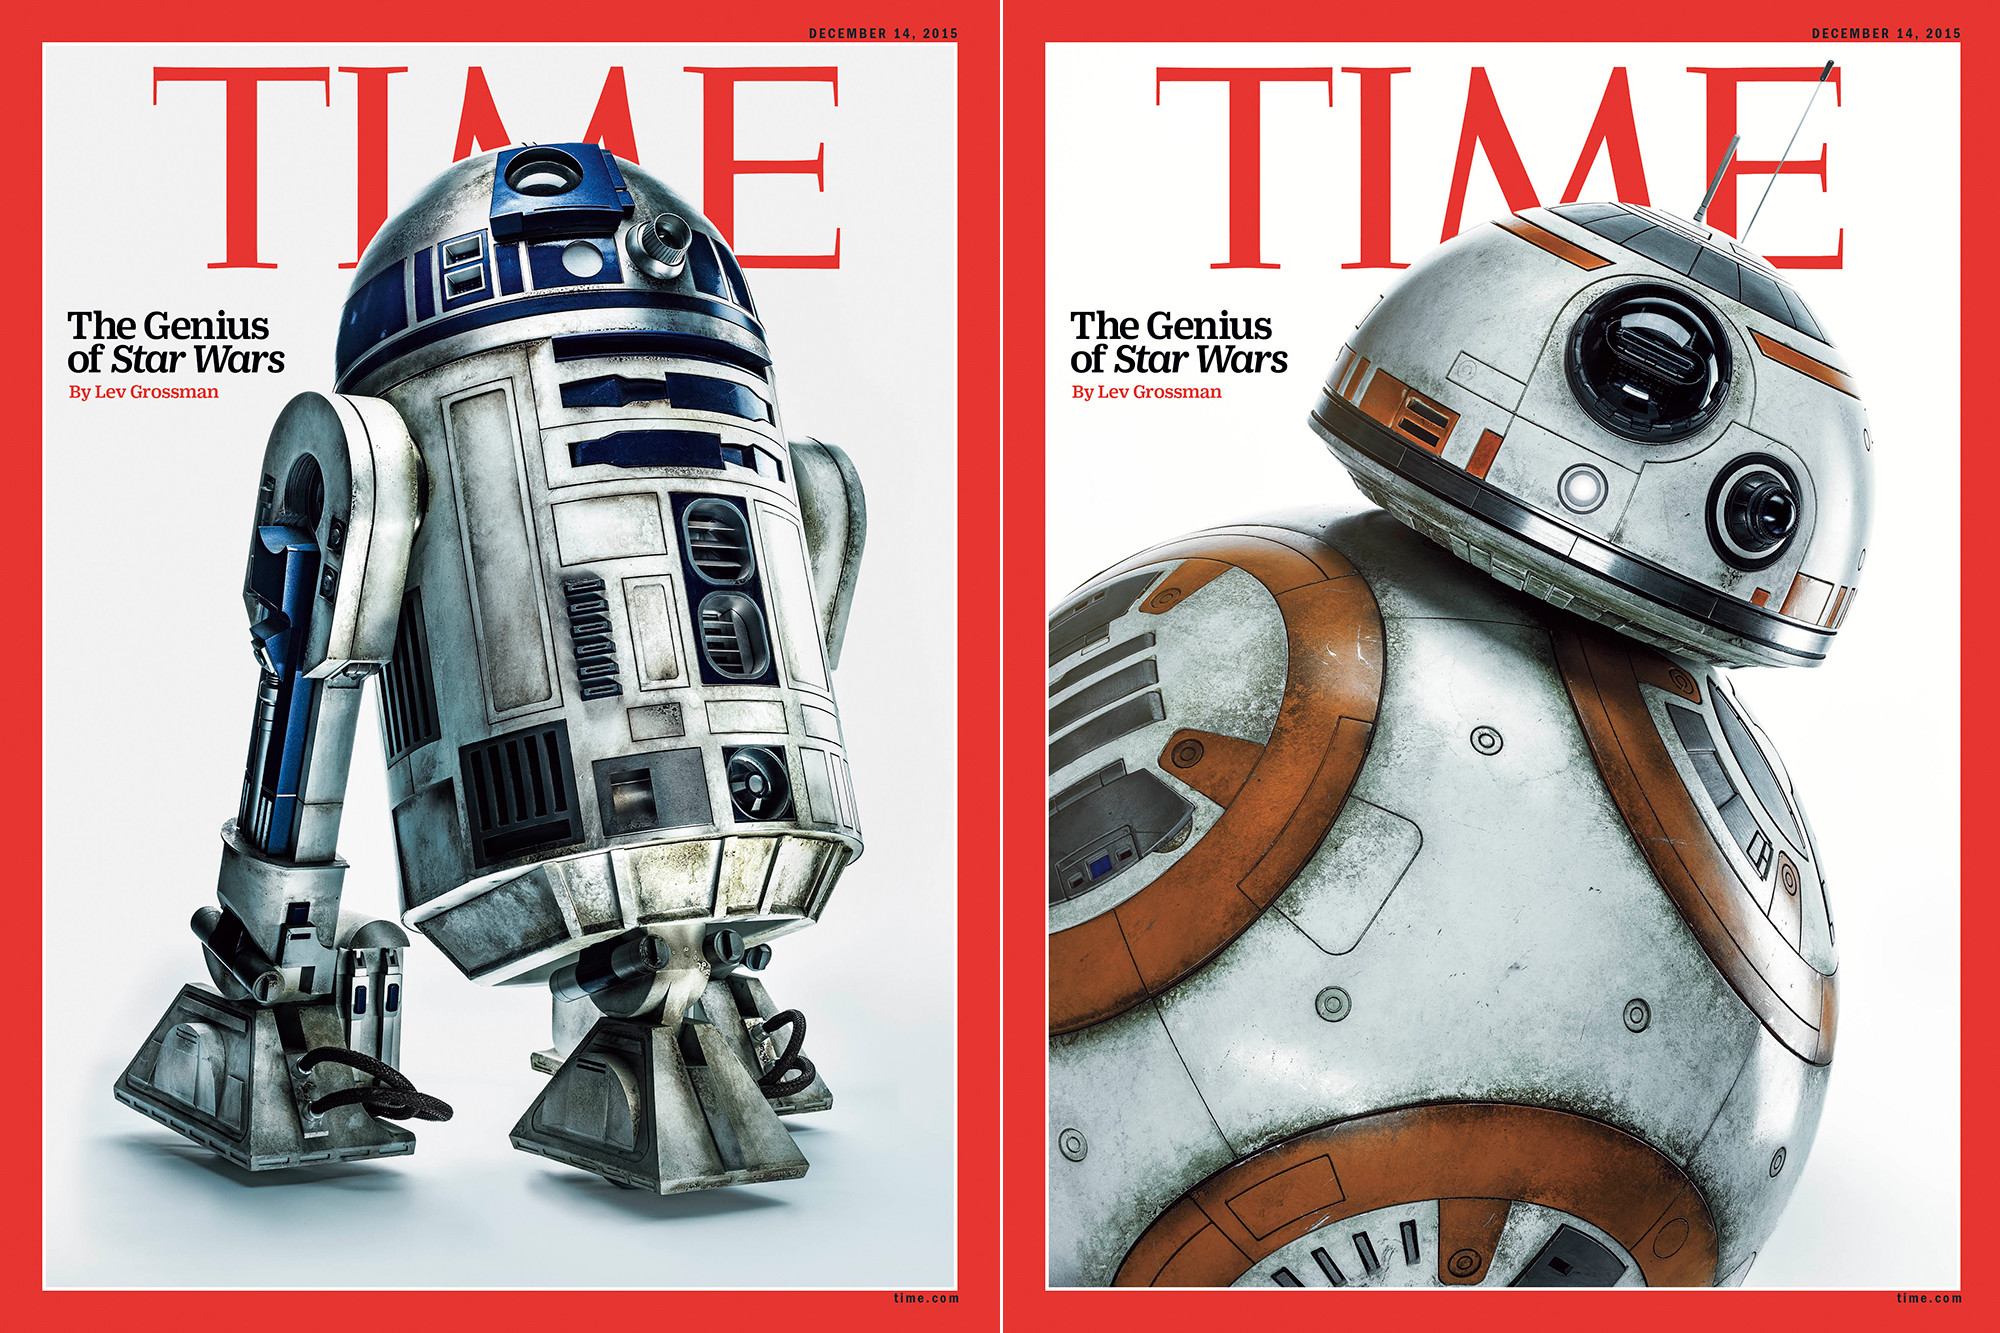 2000x1333 R2-D2 and BB-8 on the cover of the Dec. 14,